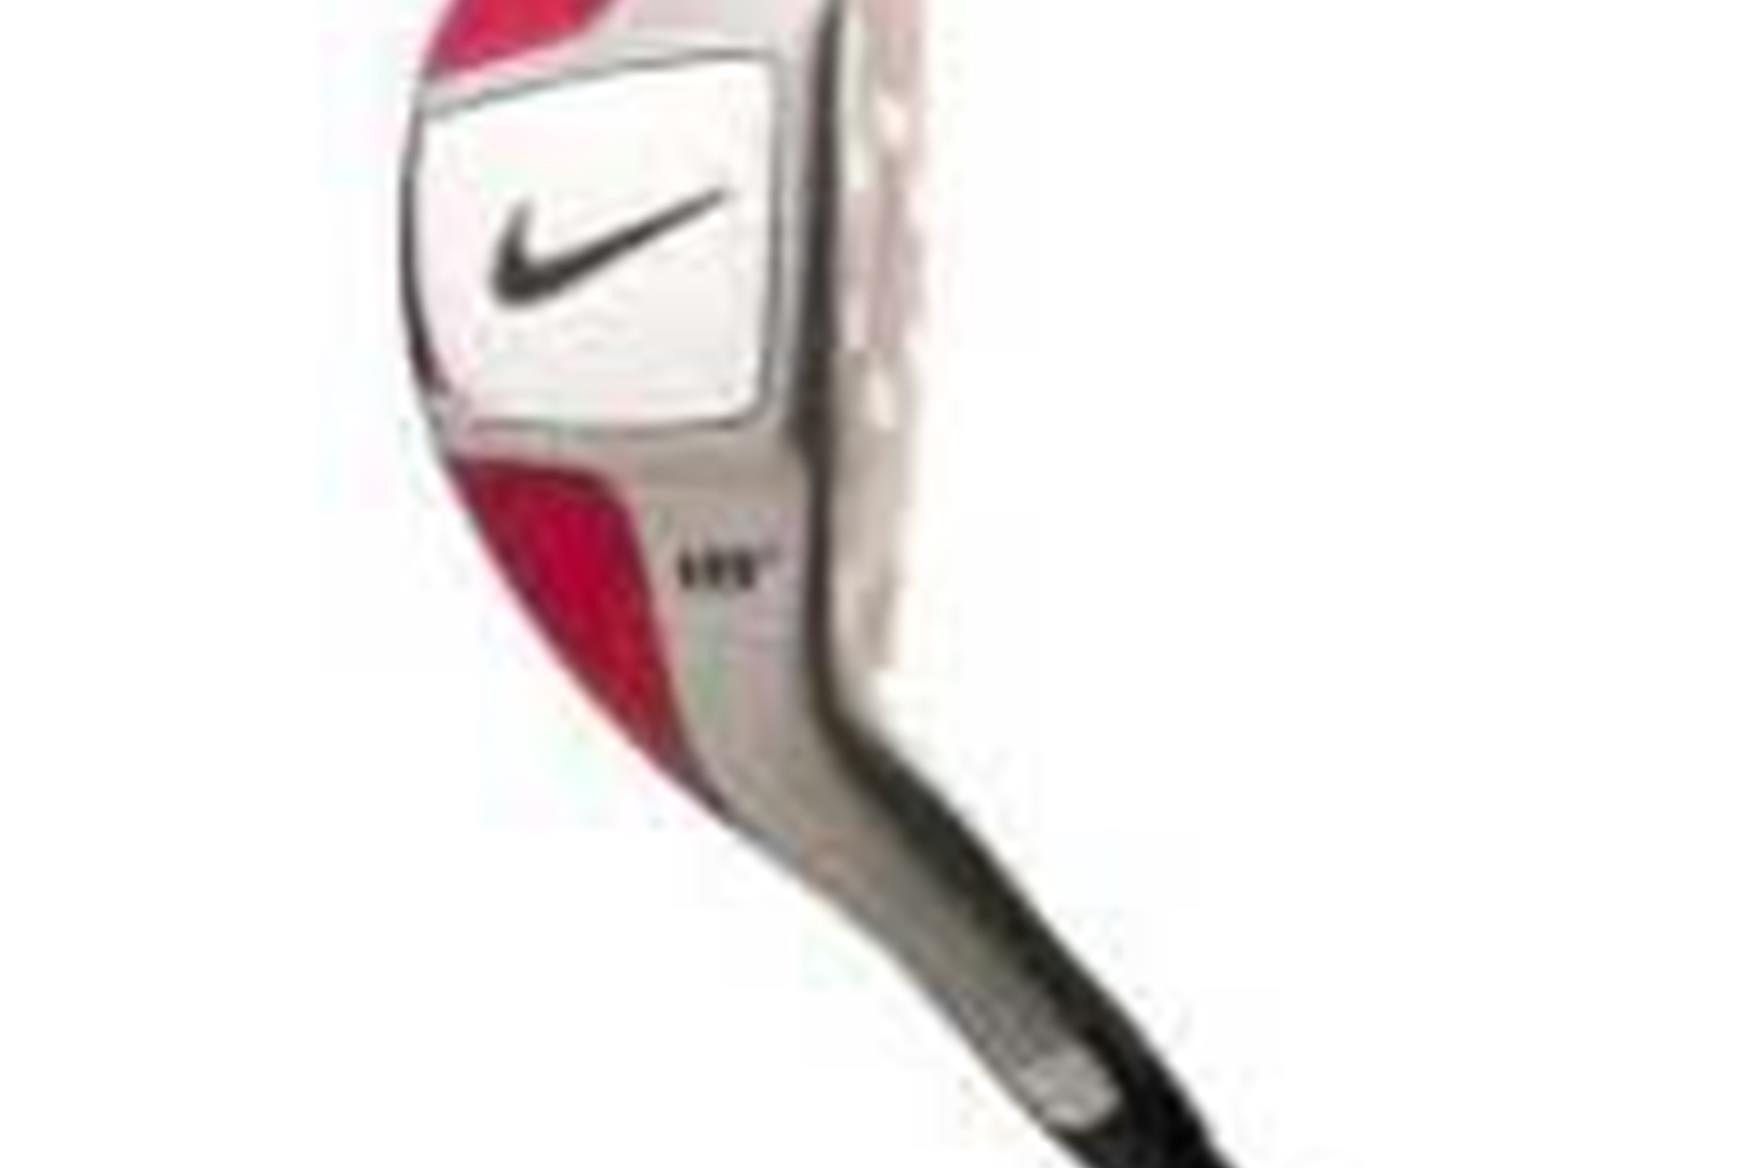 nike cpr irons